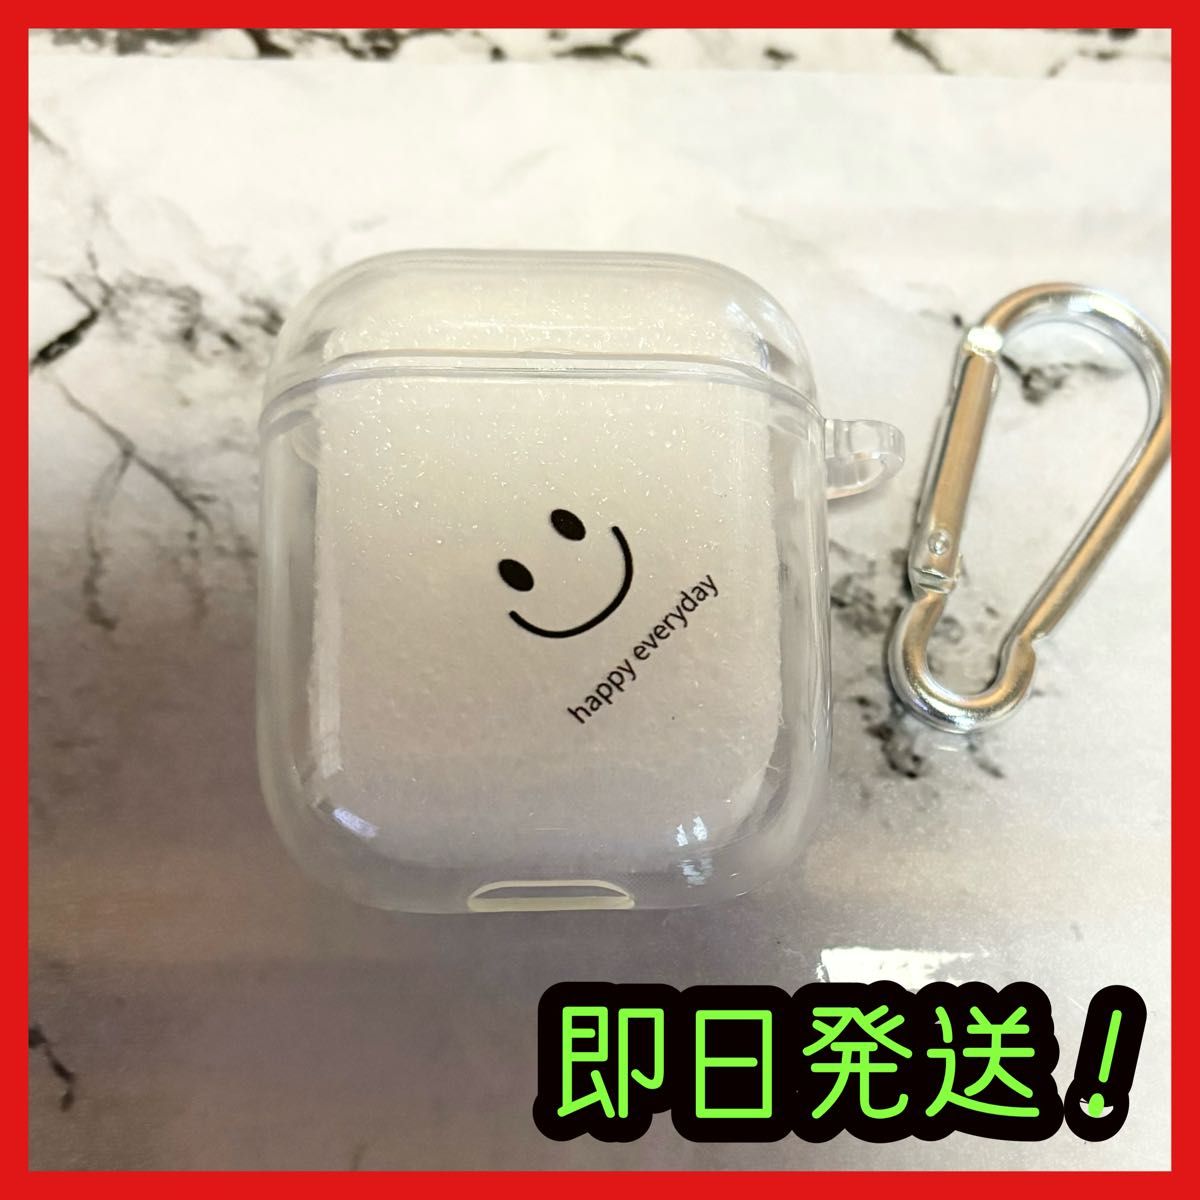 Airpods ケース 第2世代  スマイル ニコちゃん デザイン クリア 透明 